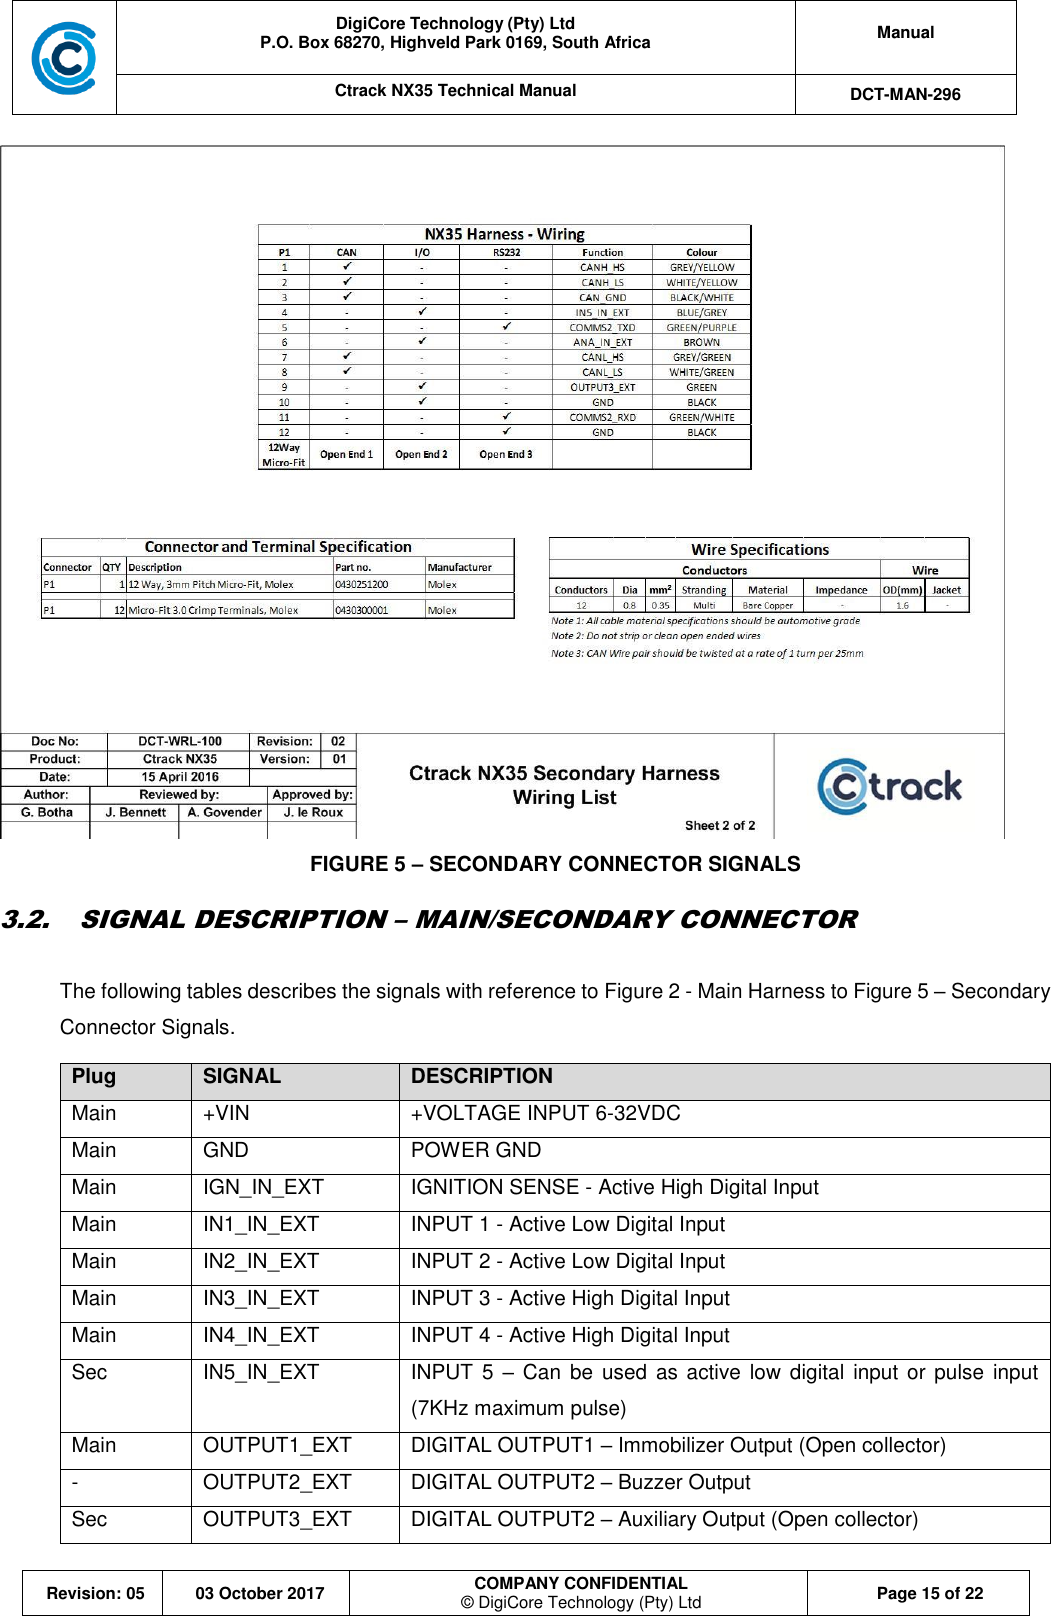  DigiCore Technology (Pty) Ltd P.O. Box 68270, Highveld Park 0169, South Africa Manual Ctrack NX35 Technical Manual DCT-MAN-296  Revision: 05 03 October 2017 COMPANY CONFIDENTIAL © DigiCore Technology (Pty) Ltd Page 15 of 22  FIGURE 5 – SECONDARY CONNECTOR SIGNALS  3.2. SIGNAL DESCRIPTION – MAIN/SECONDARY CONNECTOR The following tables describes the signals with reference to Figure 2 - Main Harness to Figure 5 – Secondary Connector Signals. Plug SIGNAL DESCRIPTION Main +VIN +VOLTAGE INPUT 6-32VDC Main GND POWER GND Main IGN_IN_EXT IGNITION SENSE - Active High Digital Input Main IN1_IN_EXT INPUT 1 - Active Low Digital Input Main IN2_IN_EXT INPUT 2 - Active Low Digital Input Main IN3_IN_EXT INPUT 3 - Active High Digital Input Main IN4_IN_EXT INPUT 4 - Active High Digital Input Sec IN5_IN_EXT INPUT 5  – Can be  used  as  active  low  digital  input  or  pulse  input (7KHz maximum pulse) Main OUTPUT1_EXT DIGITAL OUTPUT1 – Immobilizer Output (Open collector) - OUTPUT2_EXT DIGITAL OUTPUT2 – Buzzer Output Sec OUTPUT3_EXT DIGITAL OUTPUT2 – Auxiliary Output (Open collector) 